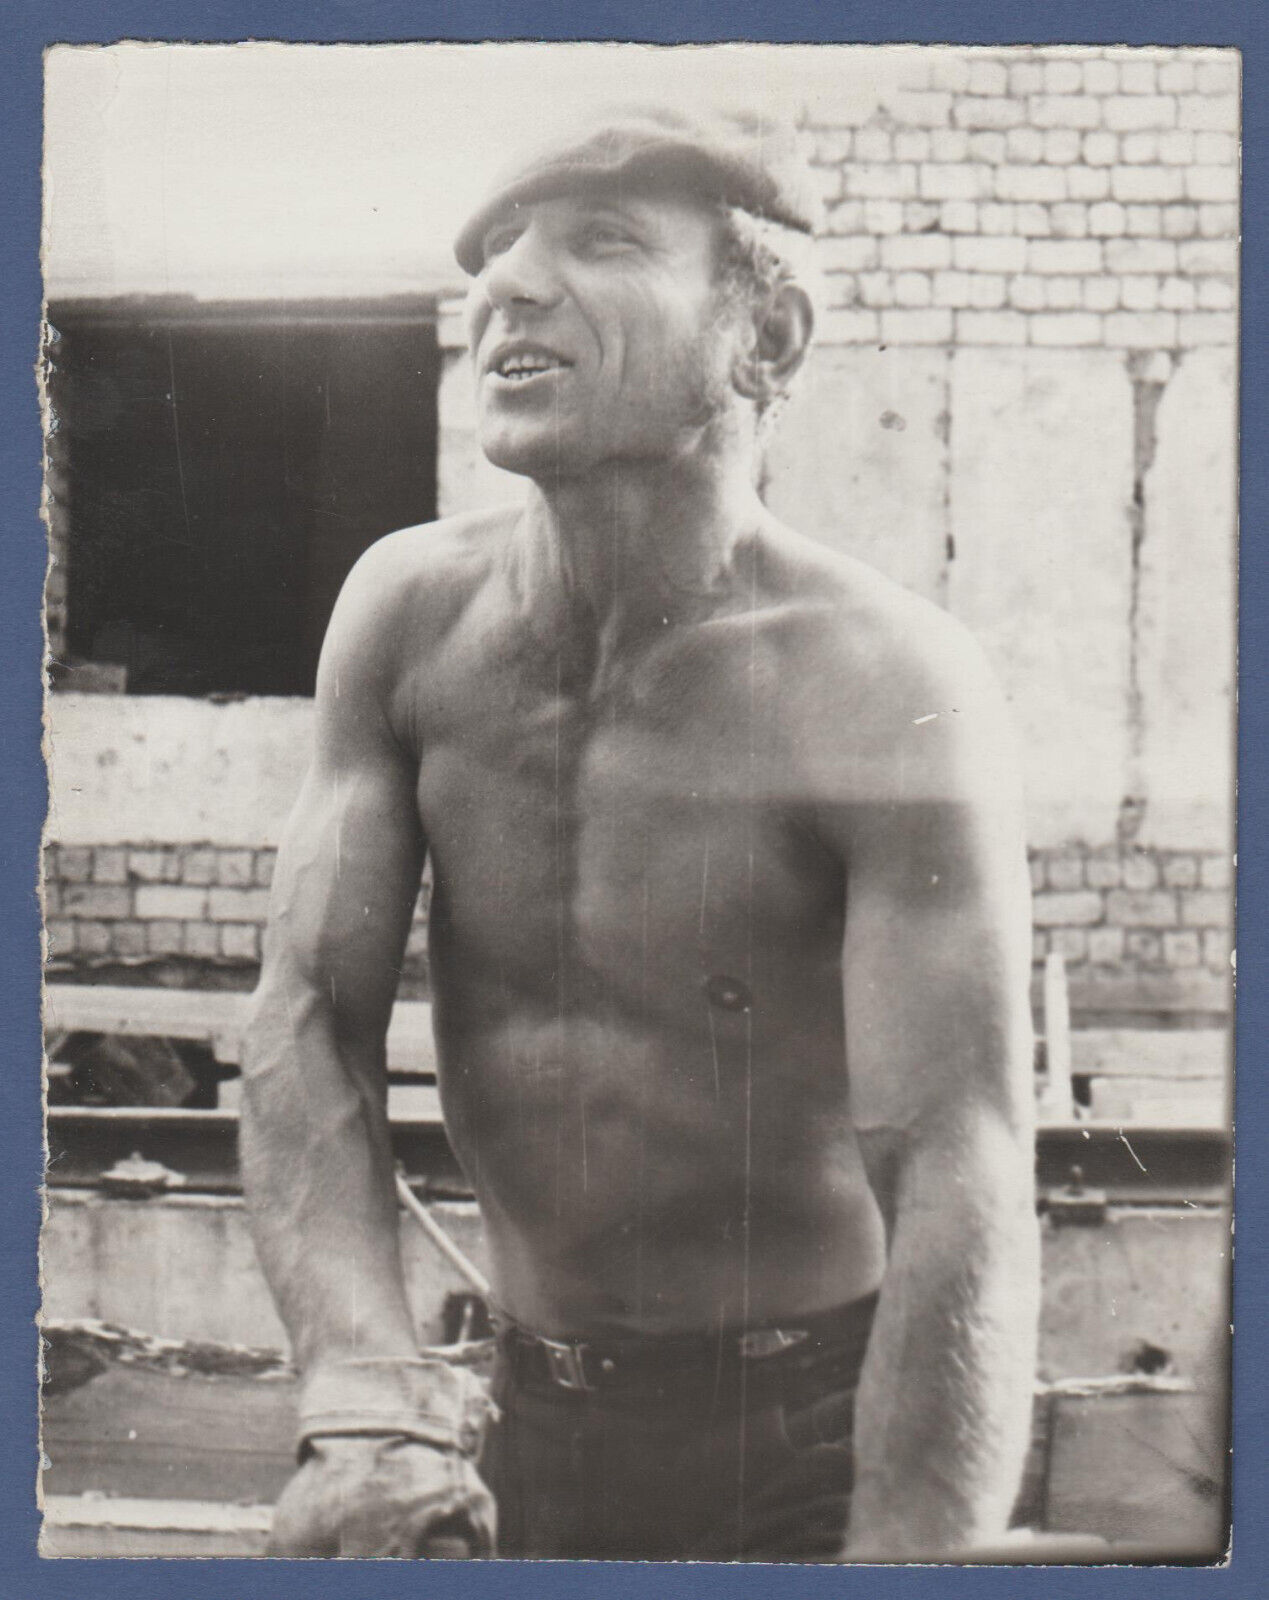 Shirtless guy pumped arms naked torso bulge muscles gay int Old Vintage Photo